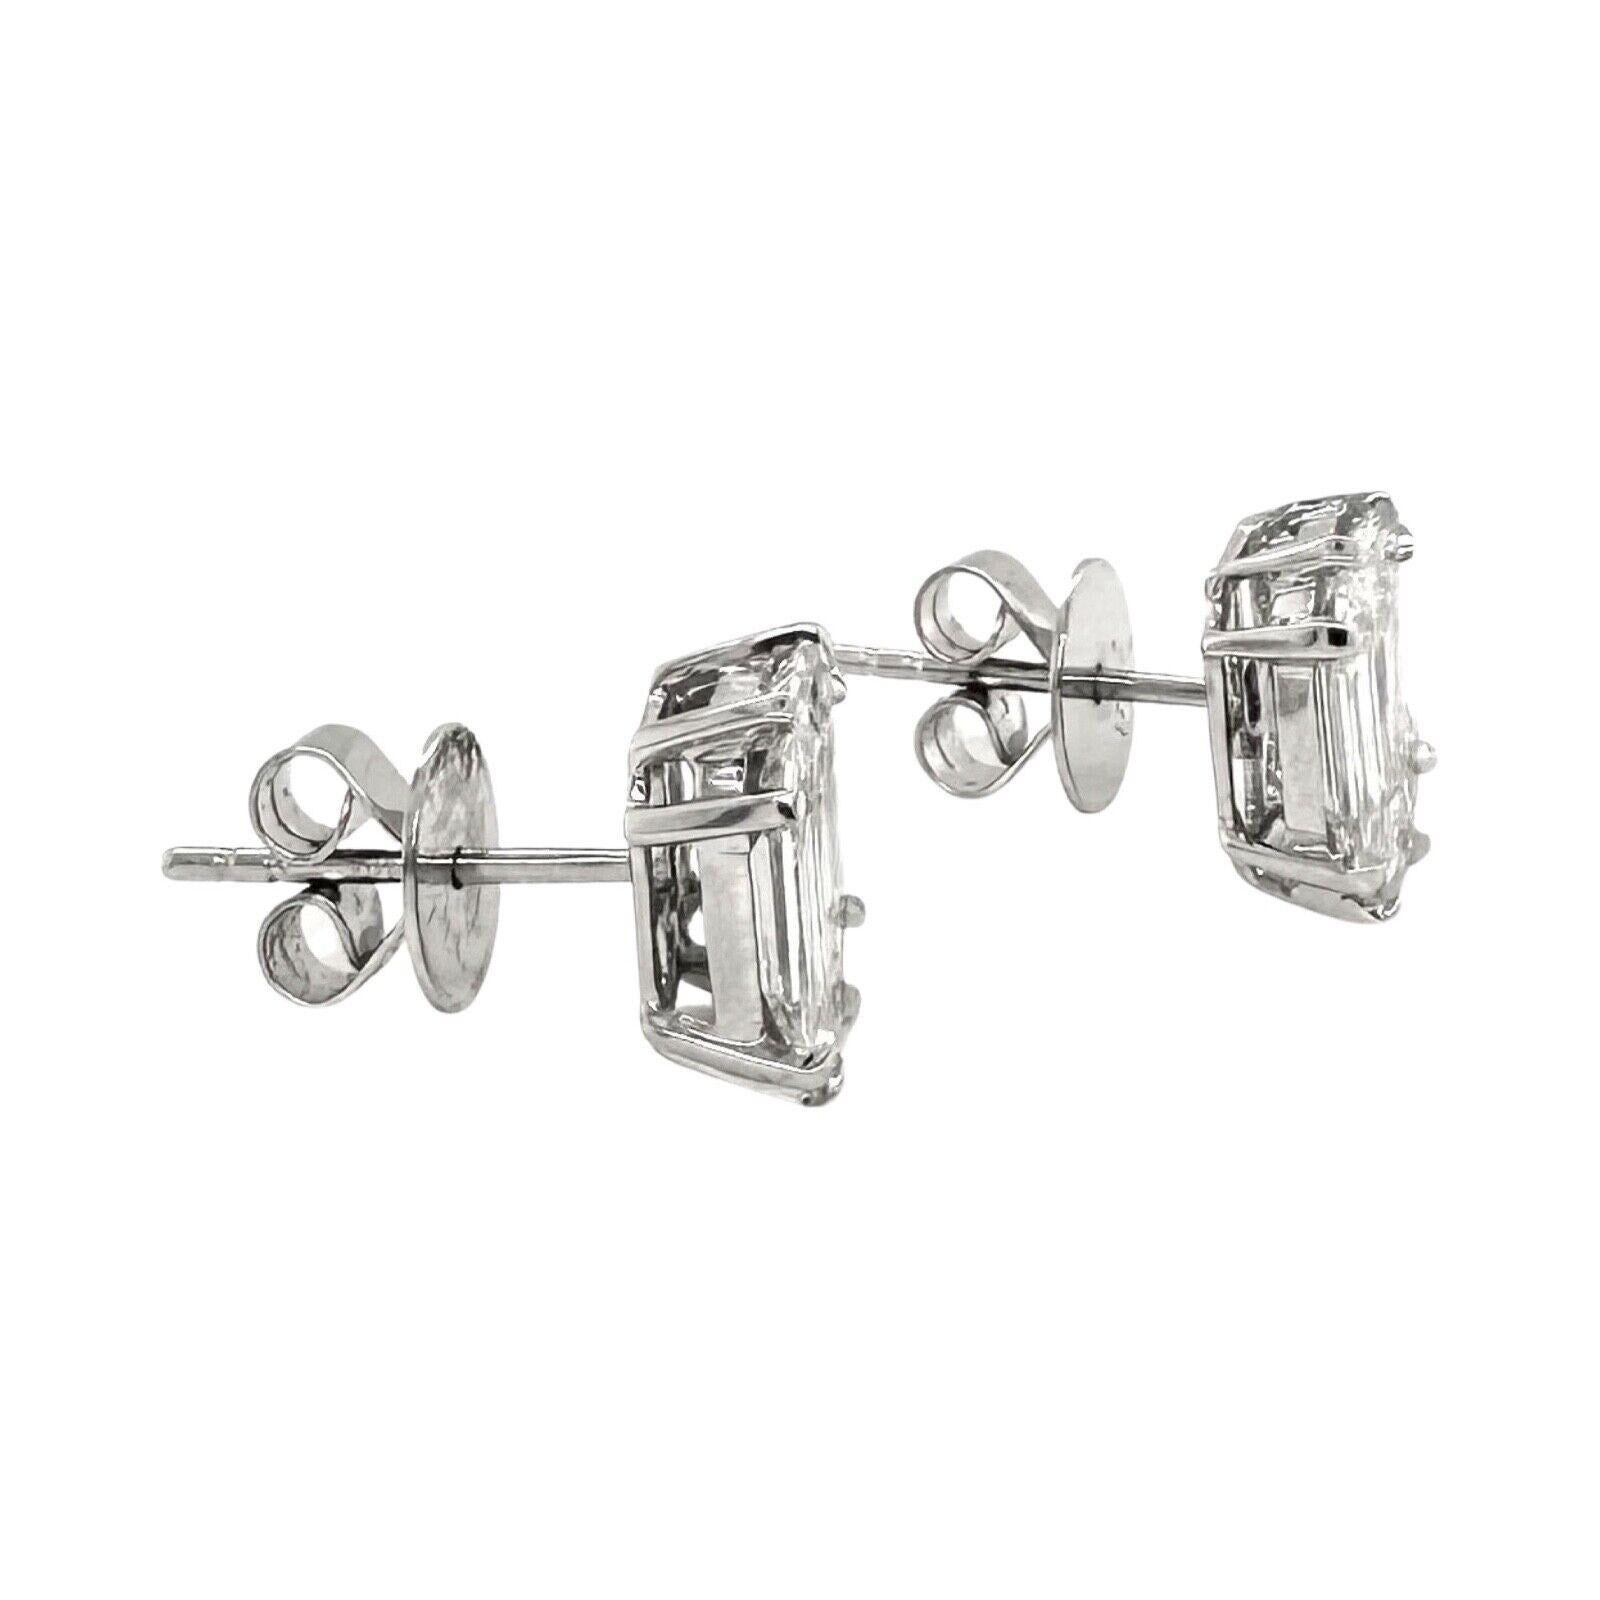 Style: Emerald-Cut Optical Illusion Studs

Metal: White Gold

Metal Purity: 18K

Stones: Illusion setting diamonds

Total Carat Weight: Approx. 1.91

Diamond Color:  G-H

Diamond Clarity: VS1

Total Item Weight (g): 3.0 

Dimensions: Approx. 1.0 x